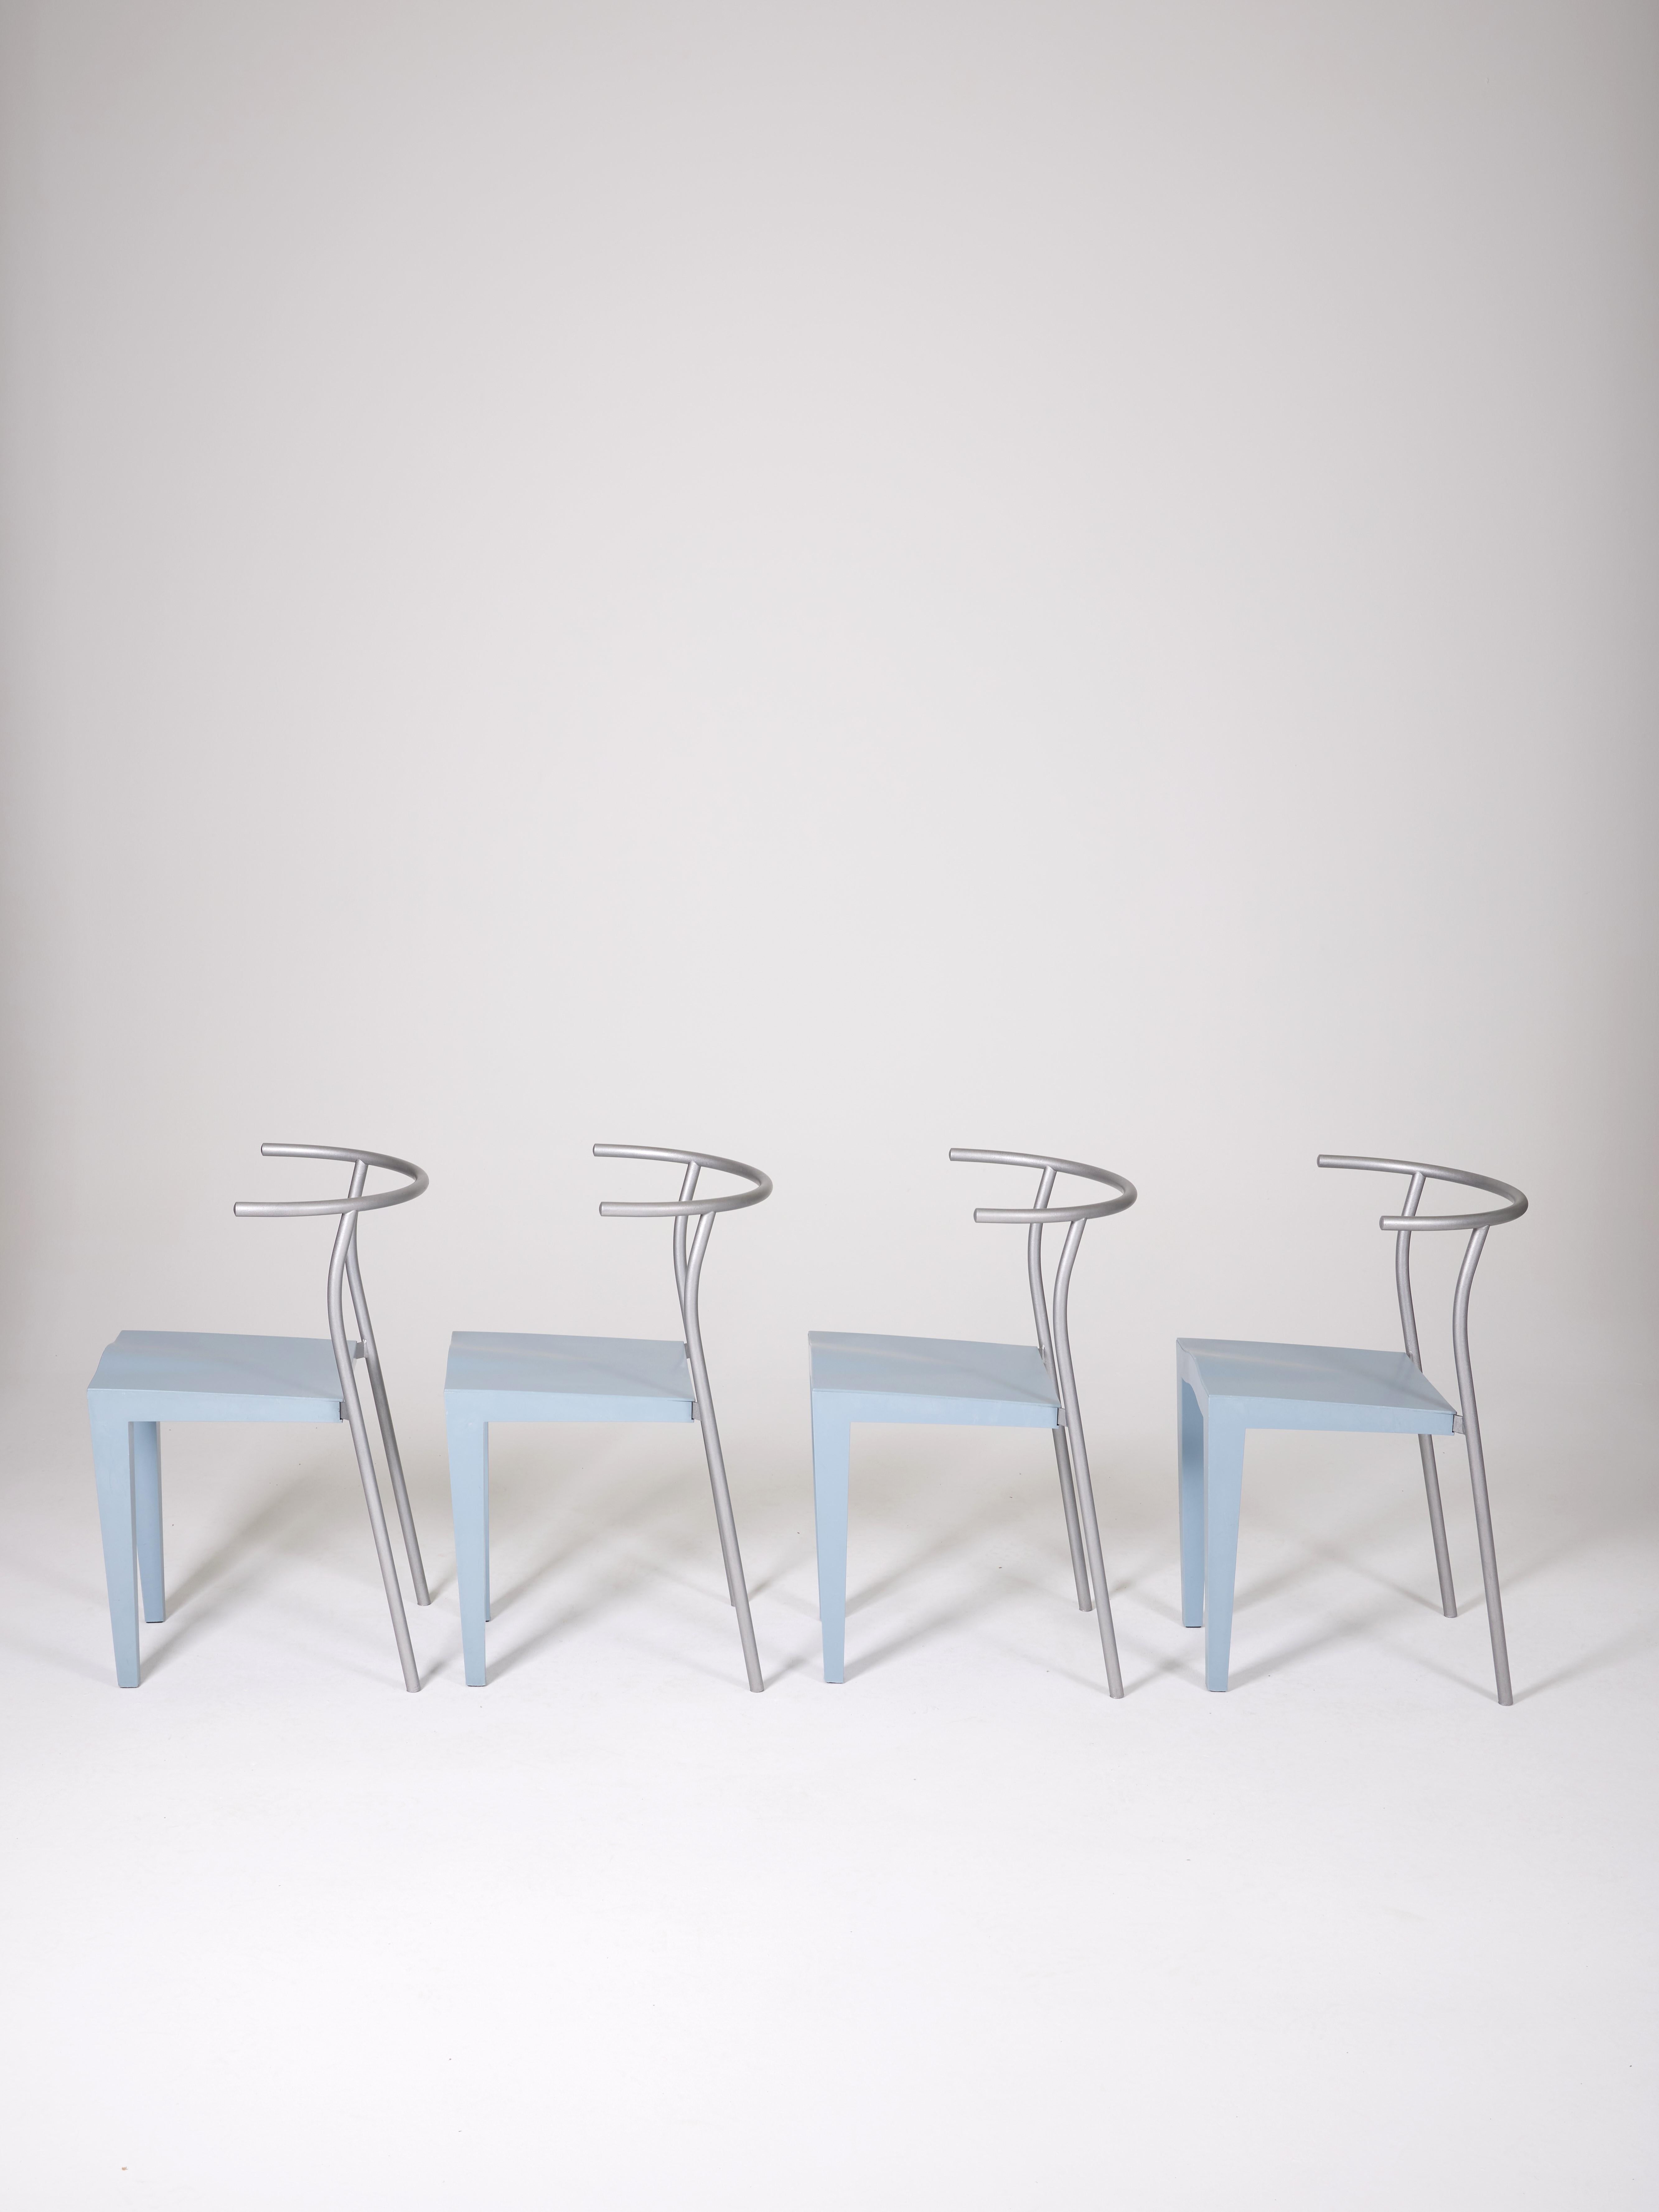 Set of 4 blue Dr Glob chairs by Philippe Starck. Edition Kartell, Italy 1988, dated under the seat. Structure in varnished tubular metal, seat in polypropylene. Very good condition.